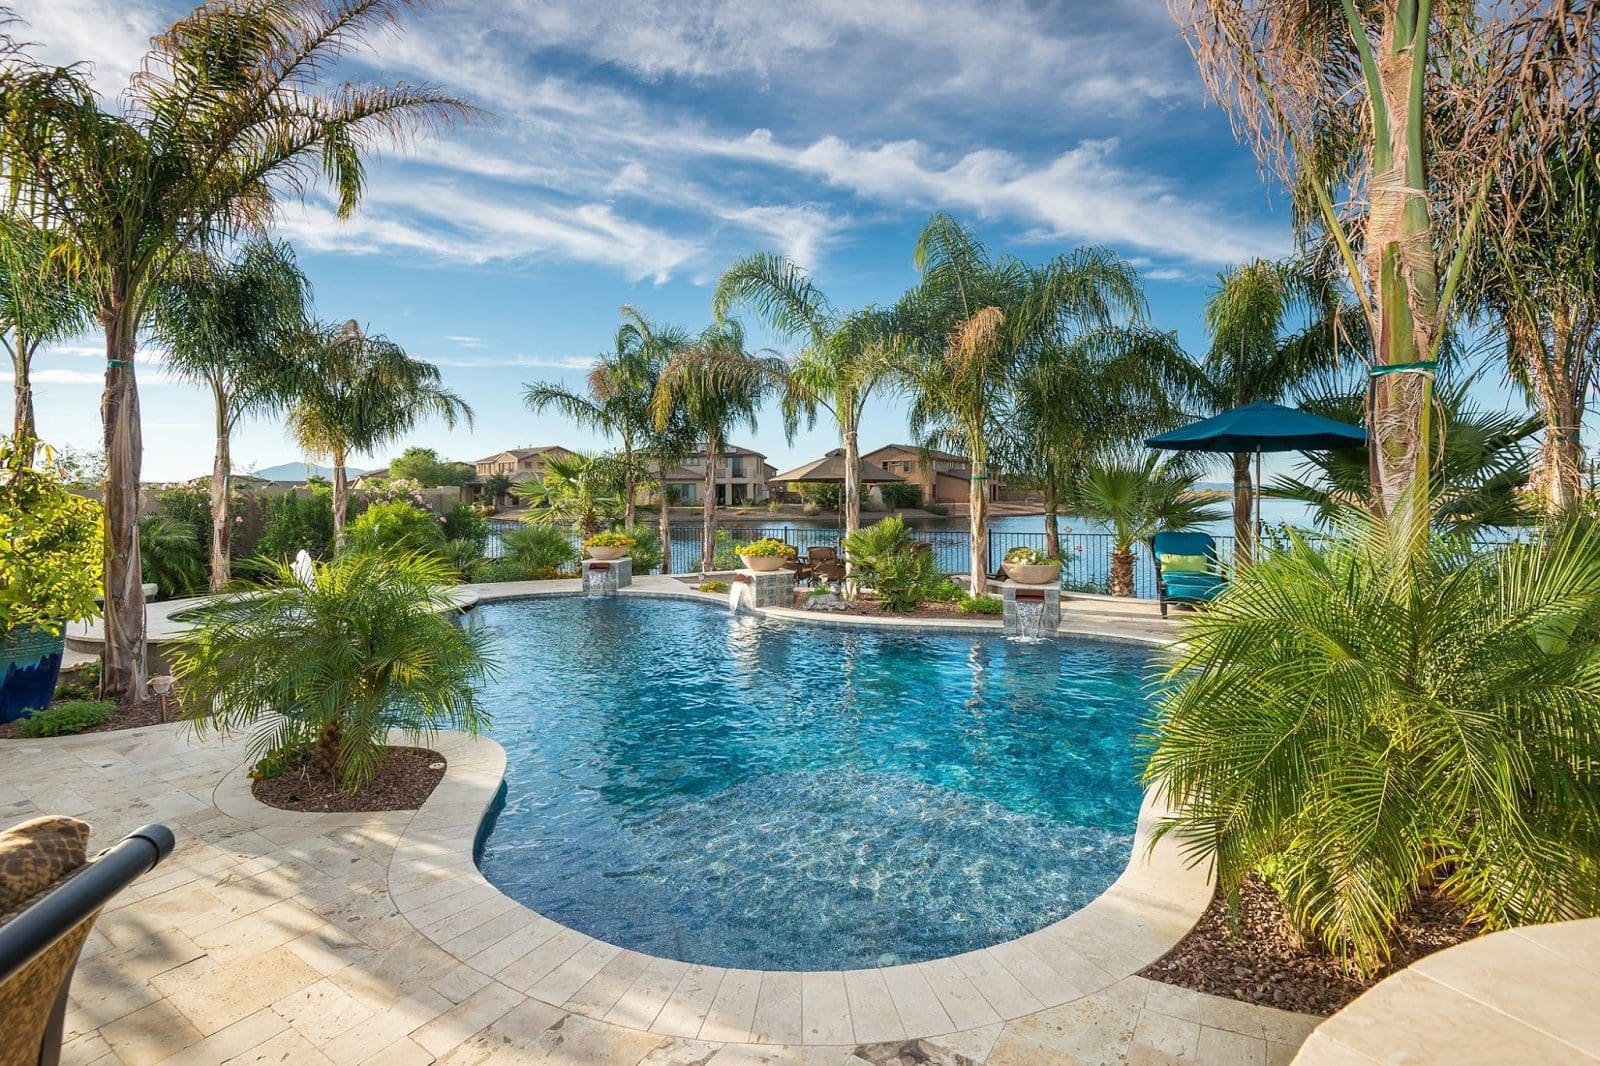 Your Guide to Hiring a Reputable Pool Company